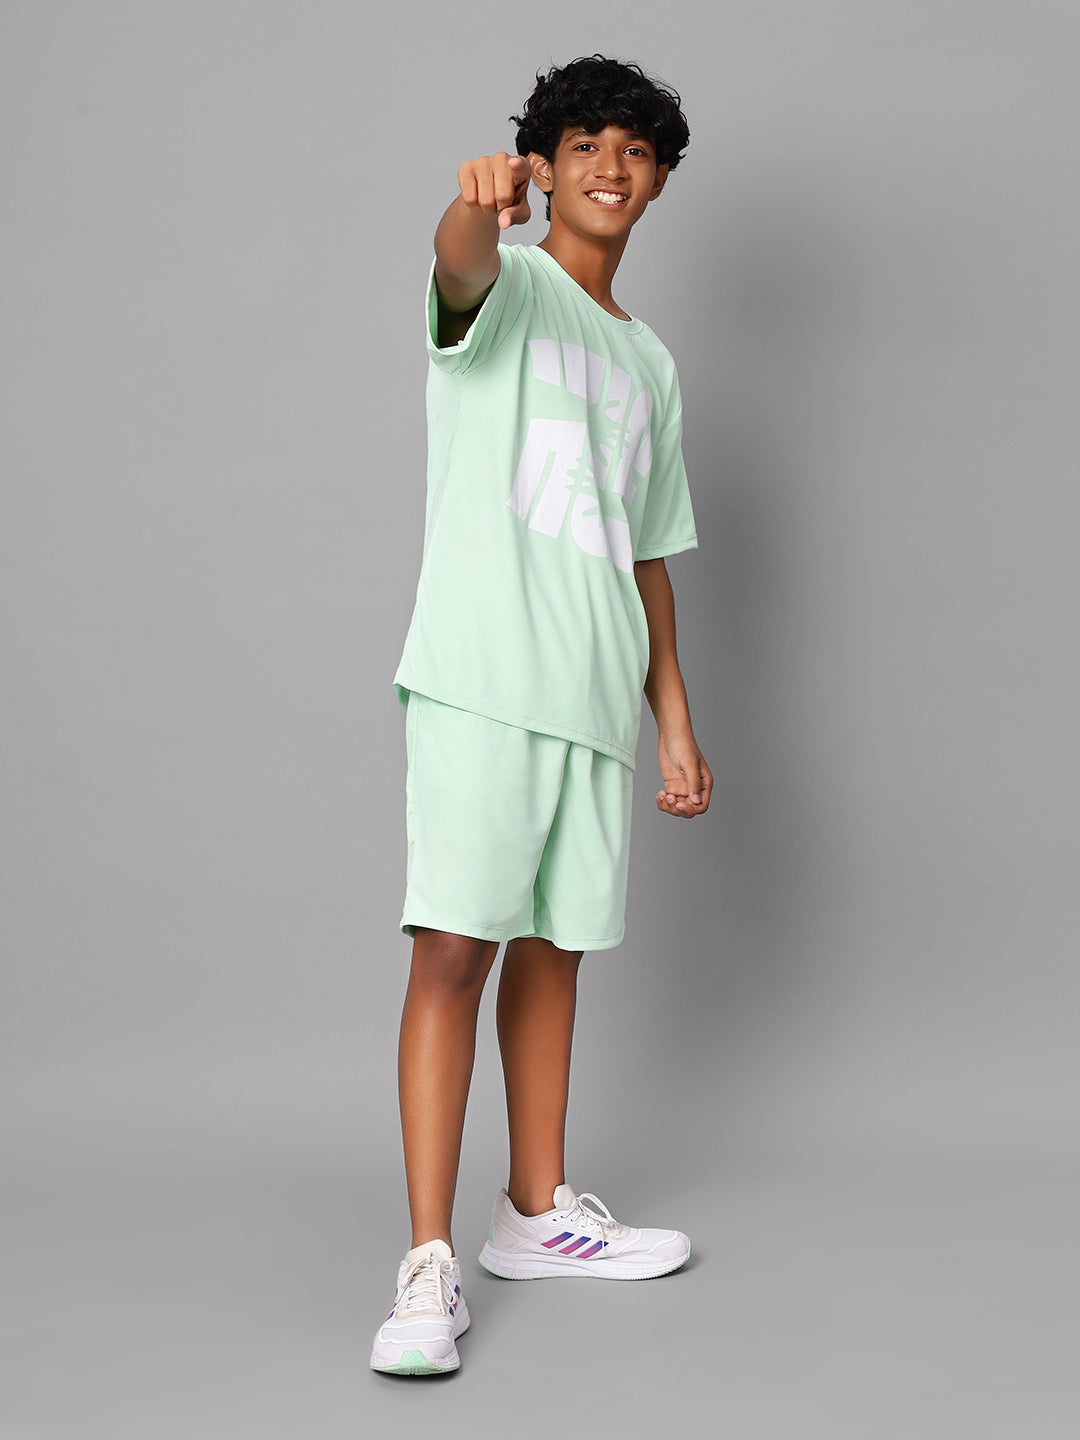 TeenTrums Boys Graphic Tshirt and Shorts Co-Ord Set (set of 2)-Mint